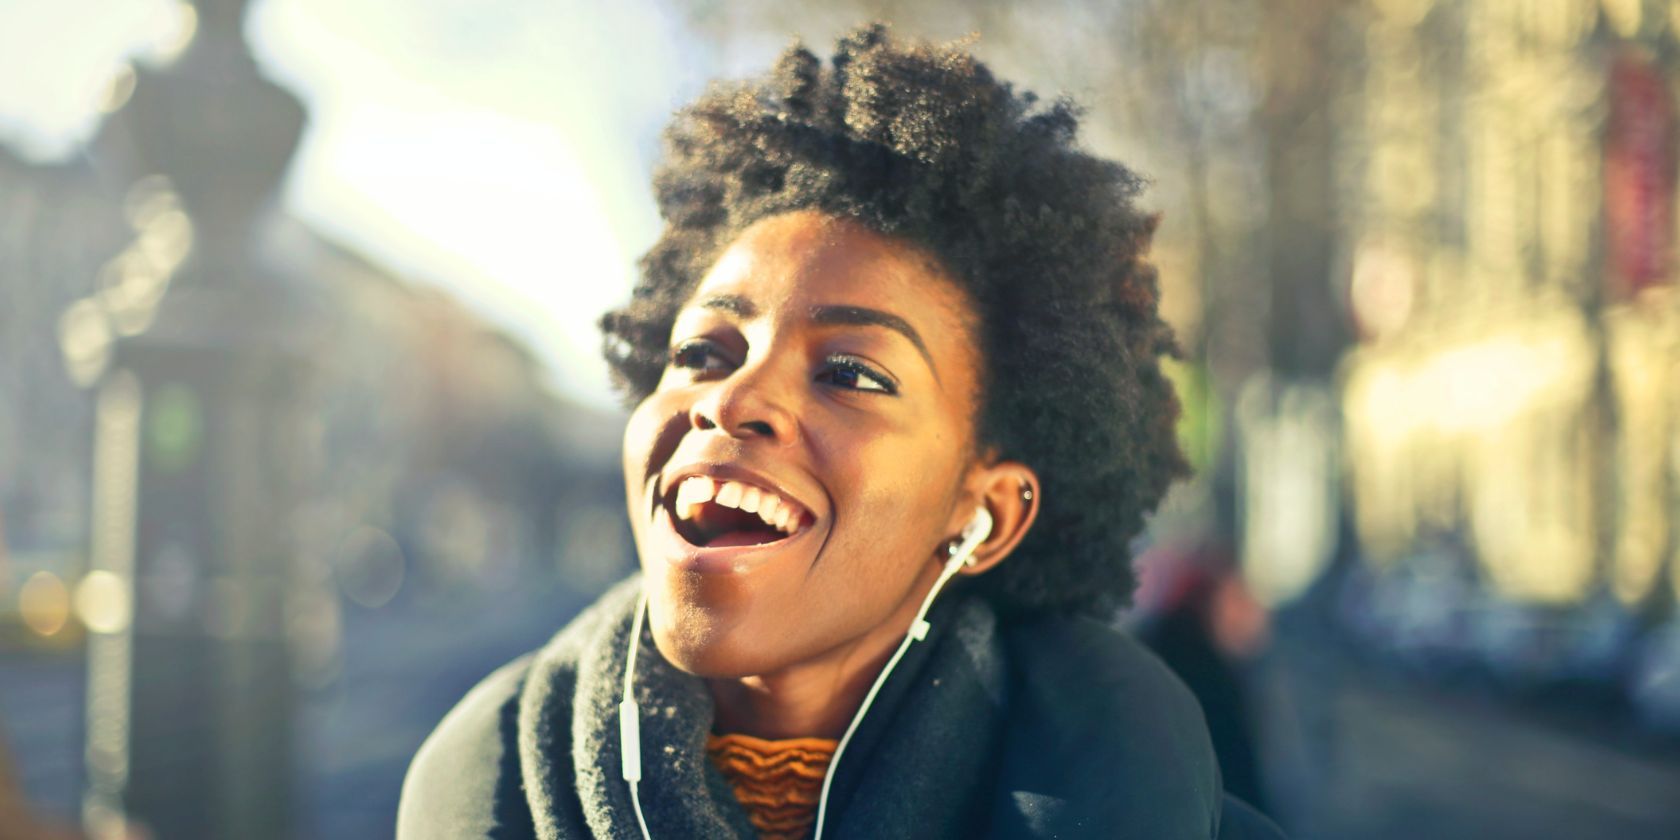 Woman with earbuds in